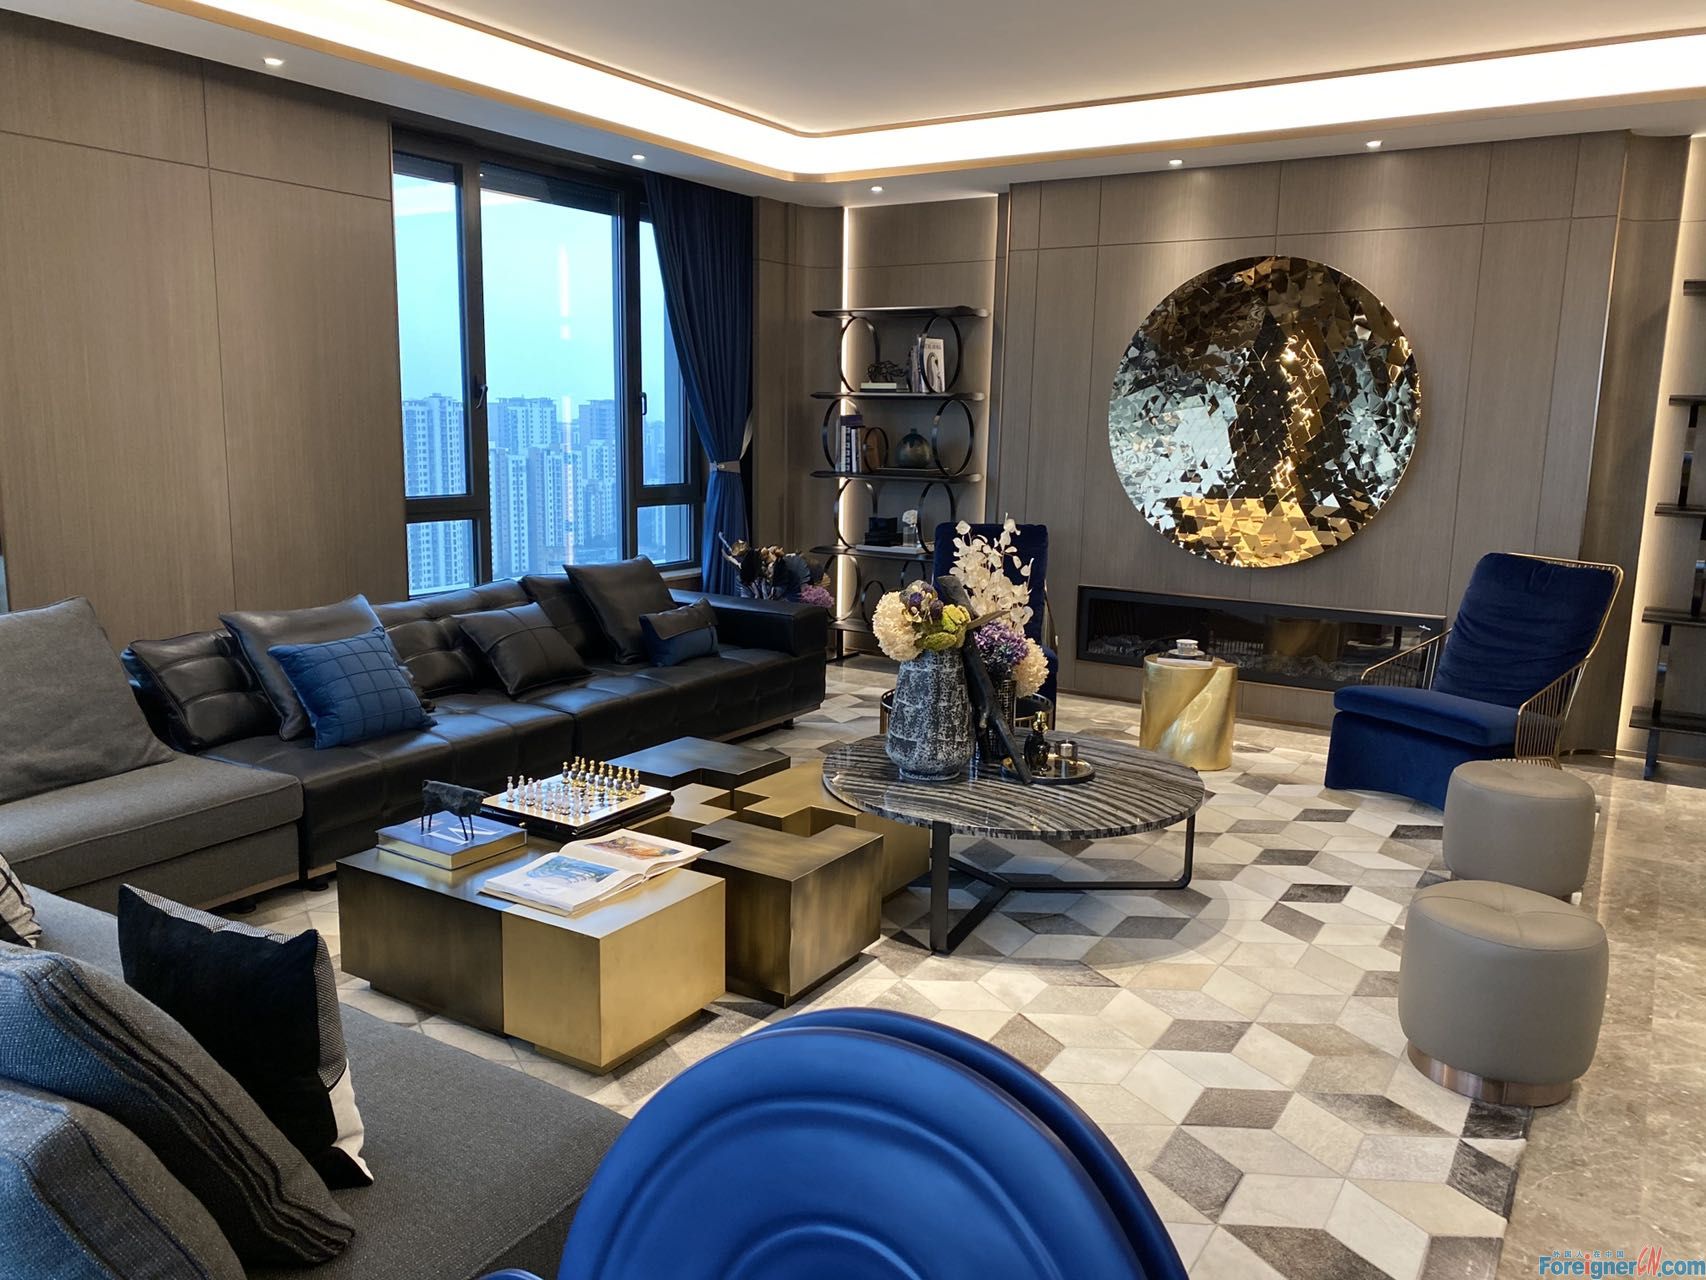 Luxurious!! Duplex Apartment with big Terrace/5 bedrooms and 3 bathrooms/ terrace for party & Barbecue/Close to Olympic Center, Jinji lake and metro